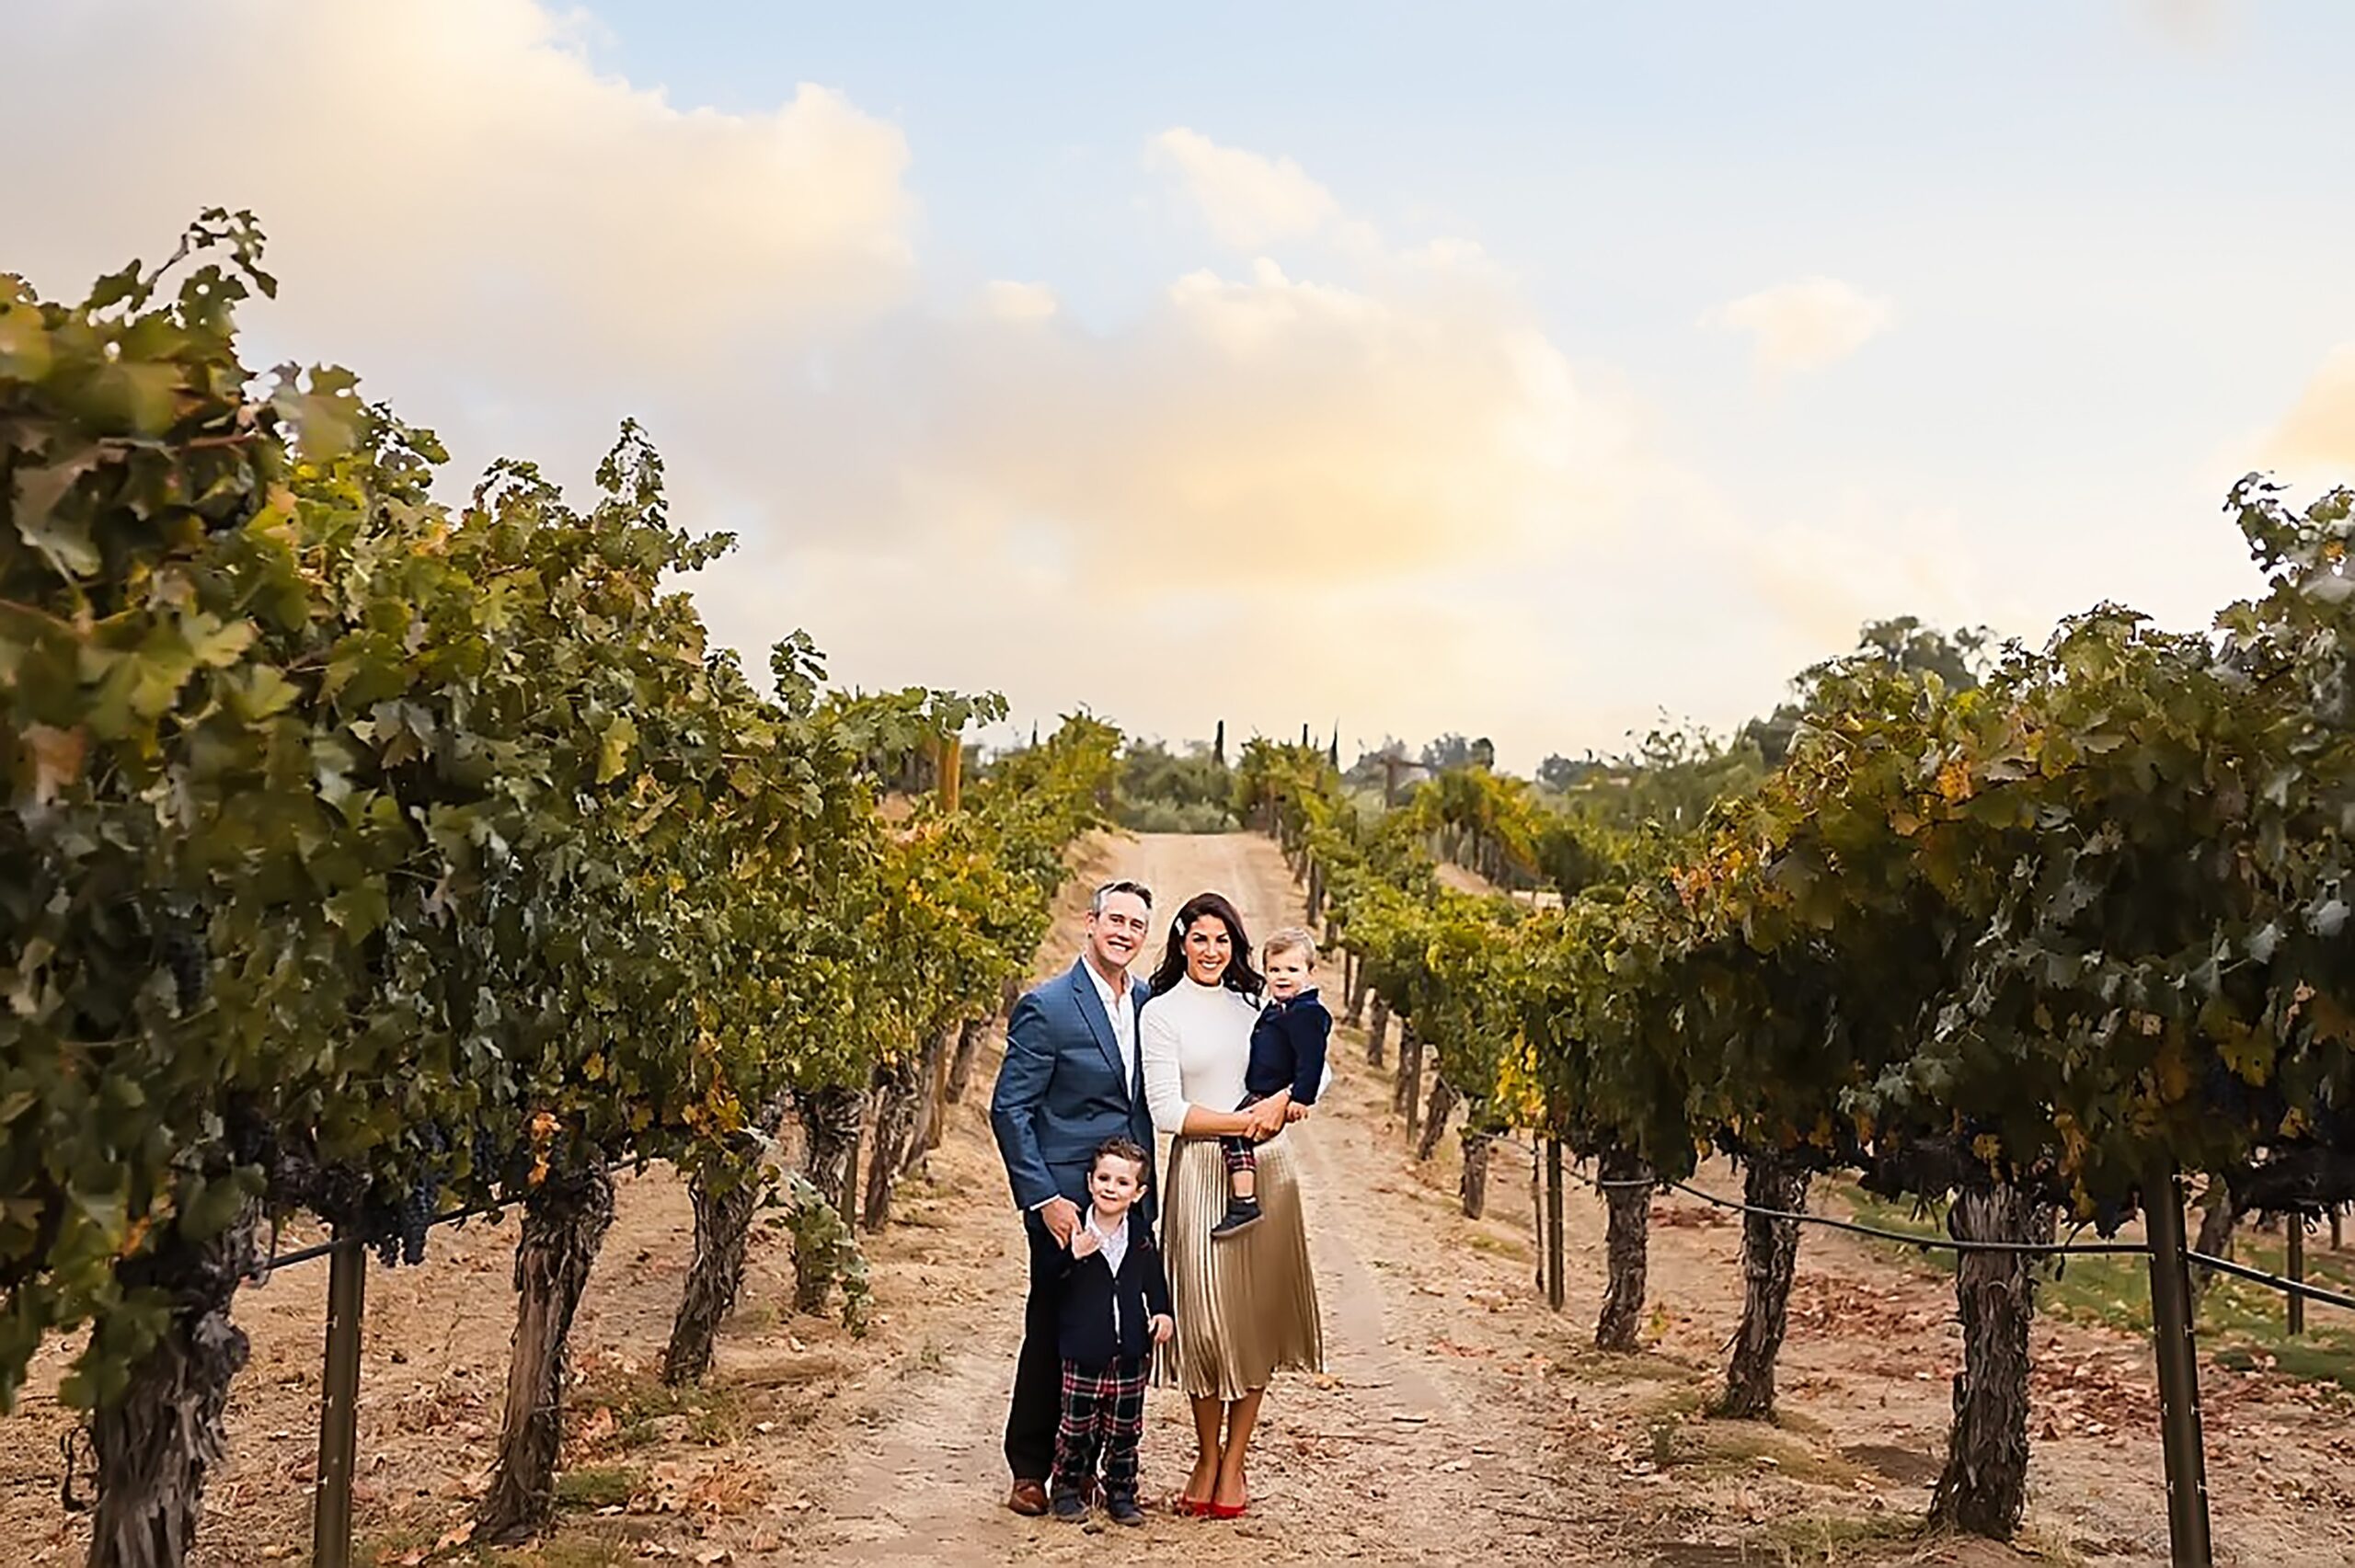 Portrait of a family in Temecula at a winery